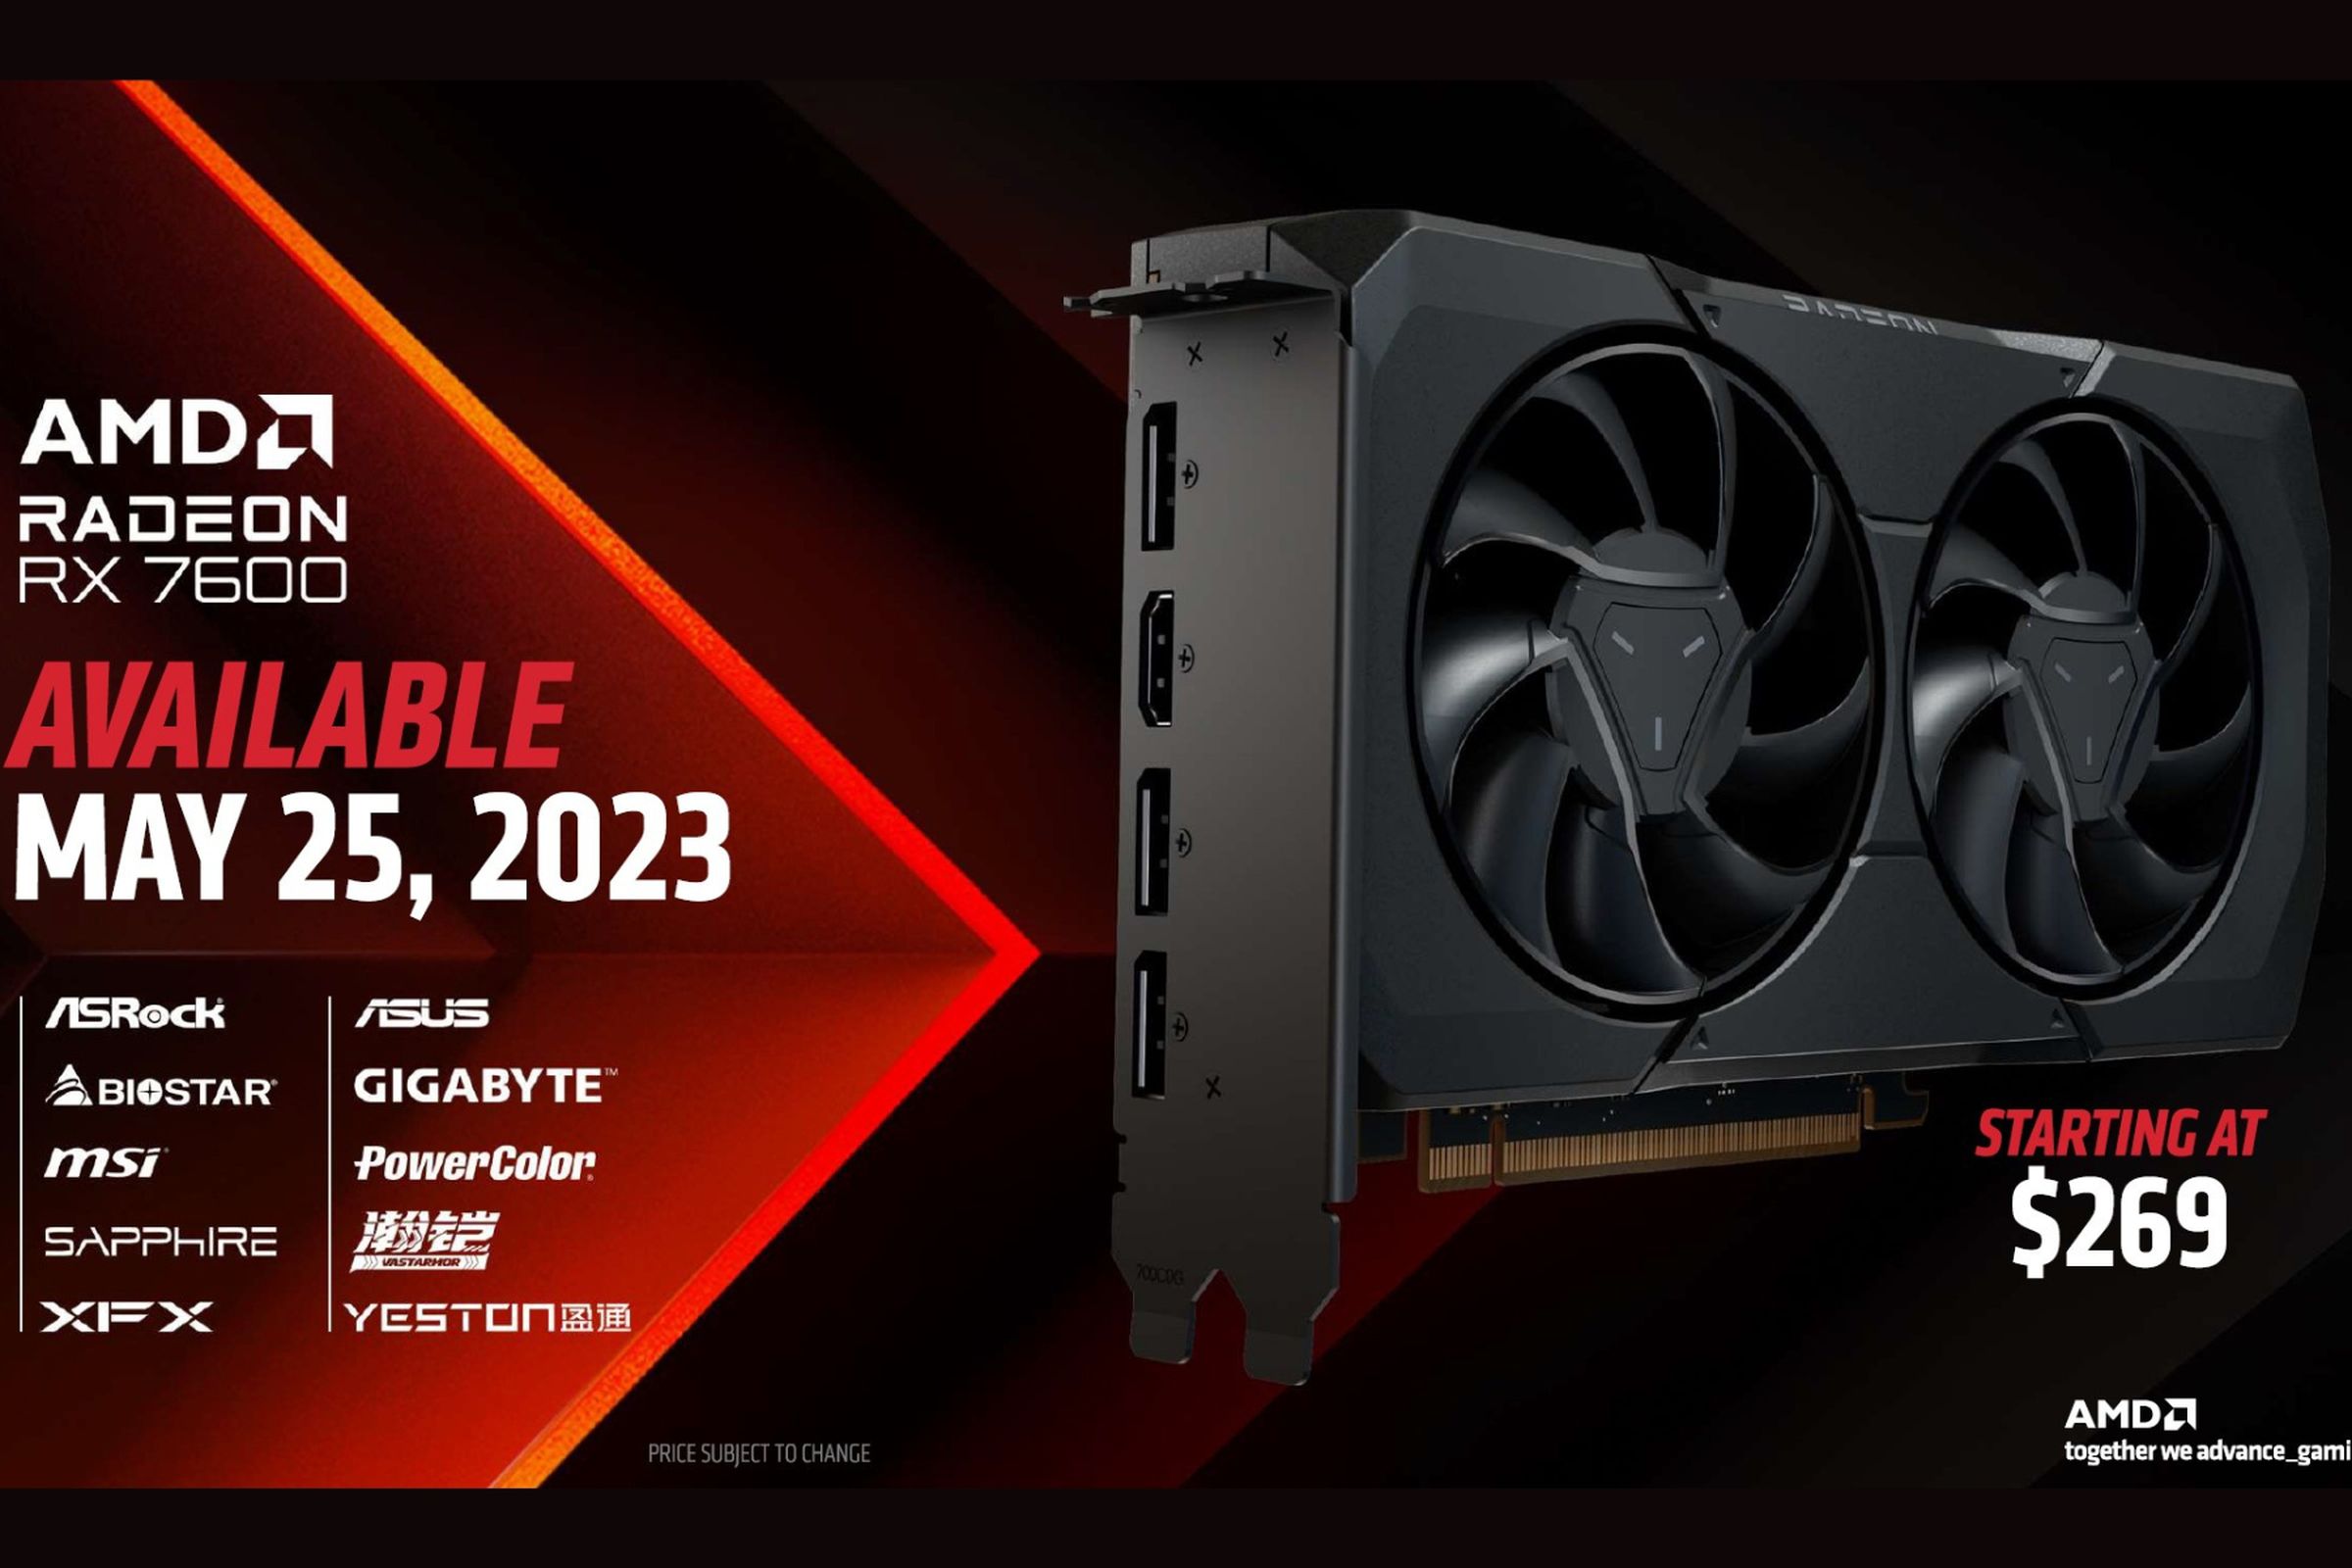 A screenshot taken from an AMD slideshow announcing that the Radeon RX 7600 GPU is available on May 25th for $269.